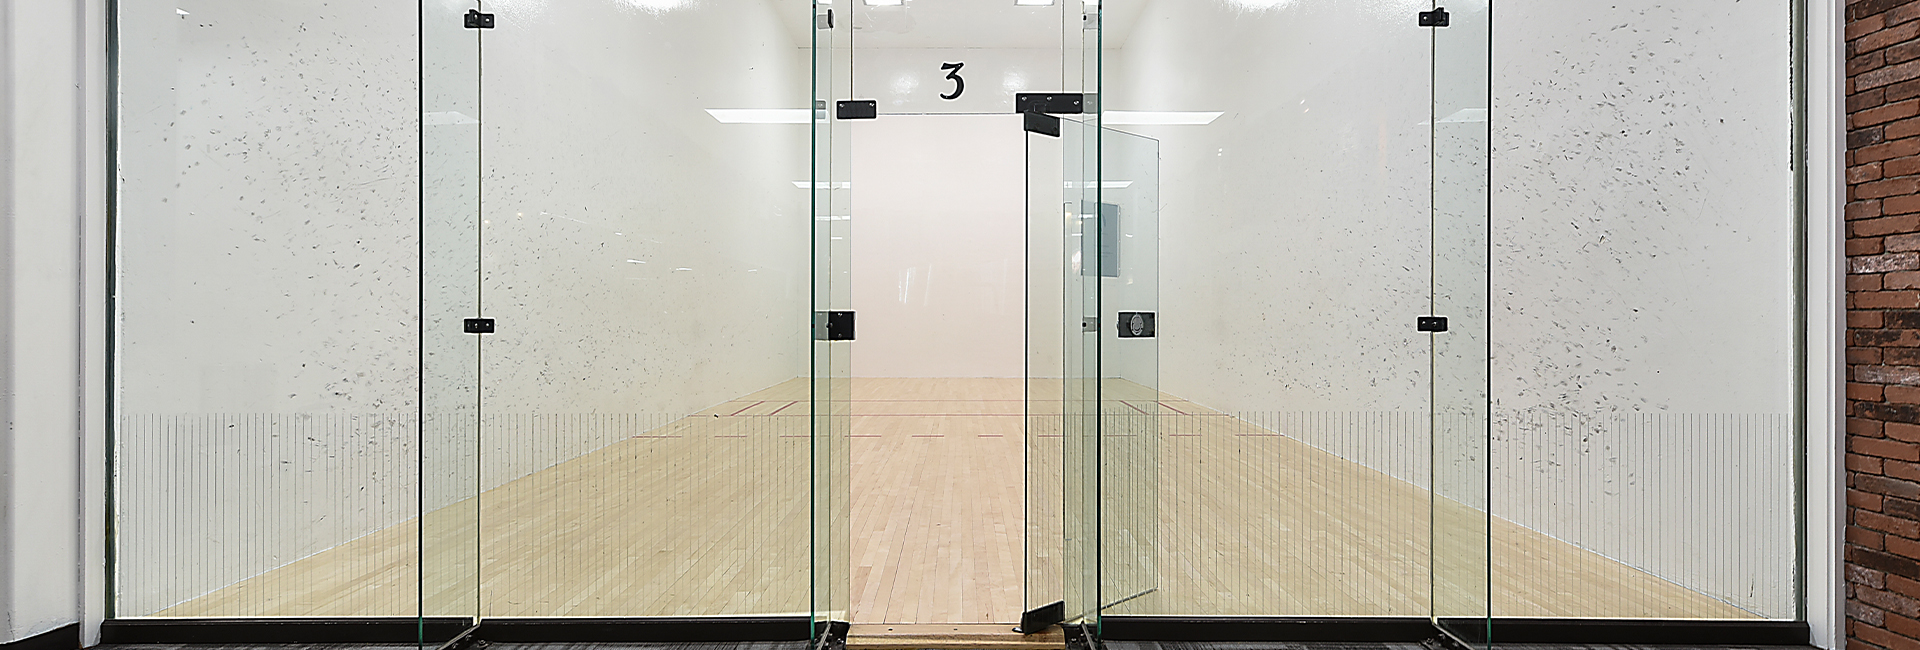 racquetball courts in a gym available with membership